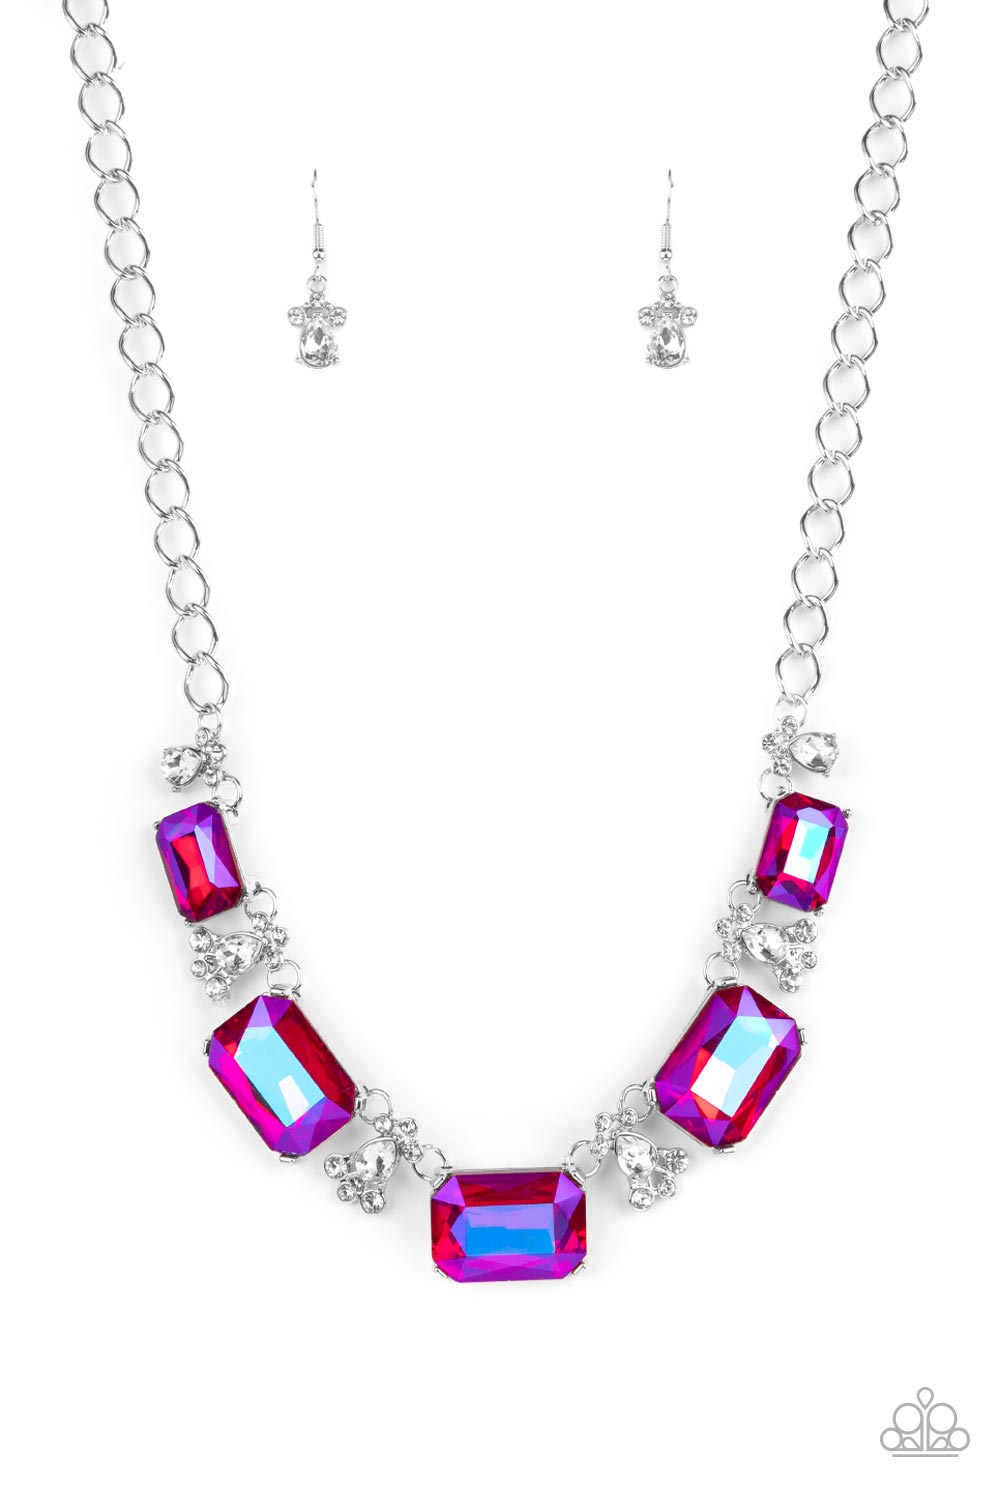 Flawlessly Famous Pink Necklace - Paparazzi Accessories  Featuring a stellar UV finish, an oversized collection of emerald cut pink rhinestones link with white rhinestone dotted teardrop rhinestone frames below the collar for a jaw-dropping display. Features an adjustable clasp closure.  Sold as one individual necklace. Includes one pair of matching earrings.